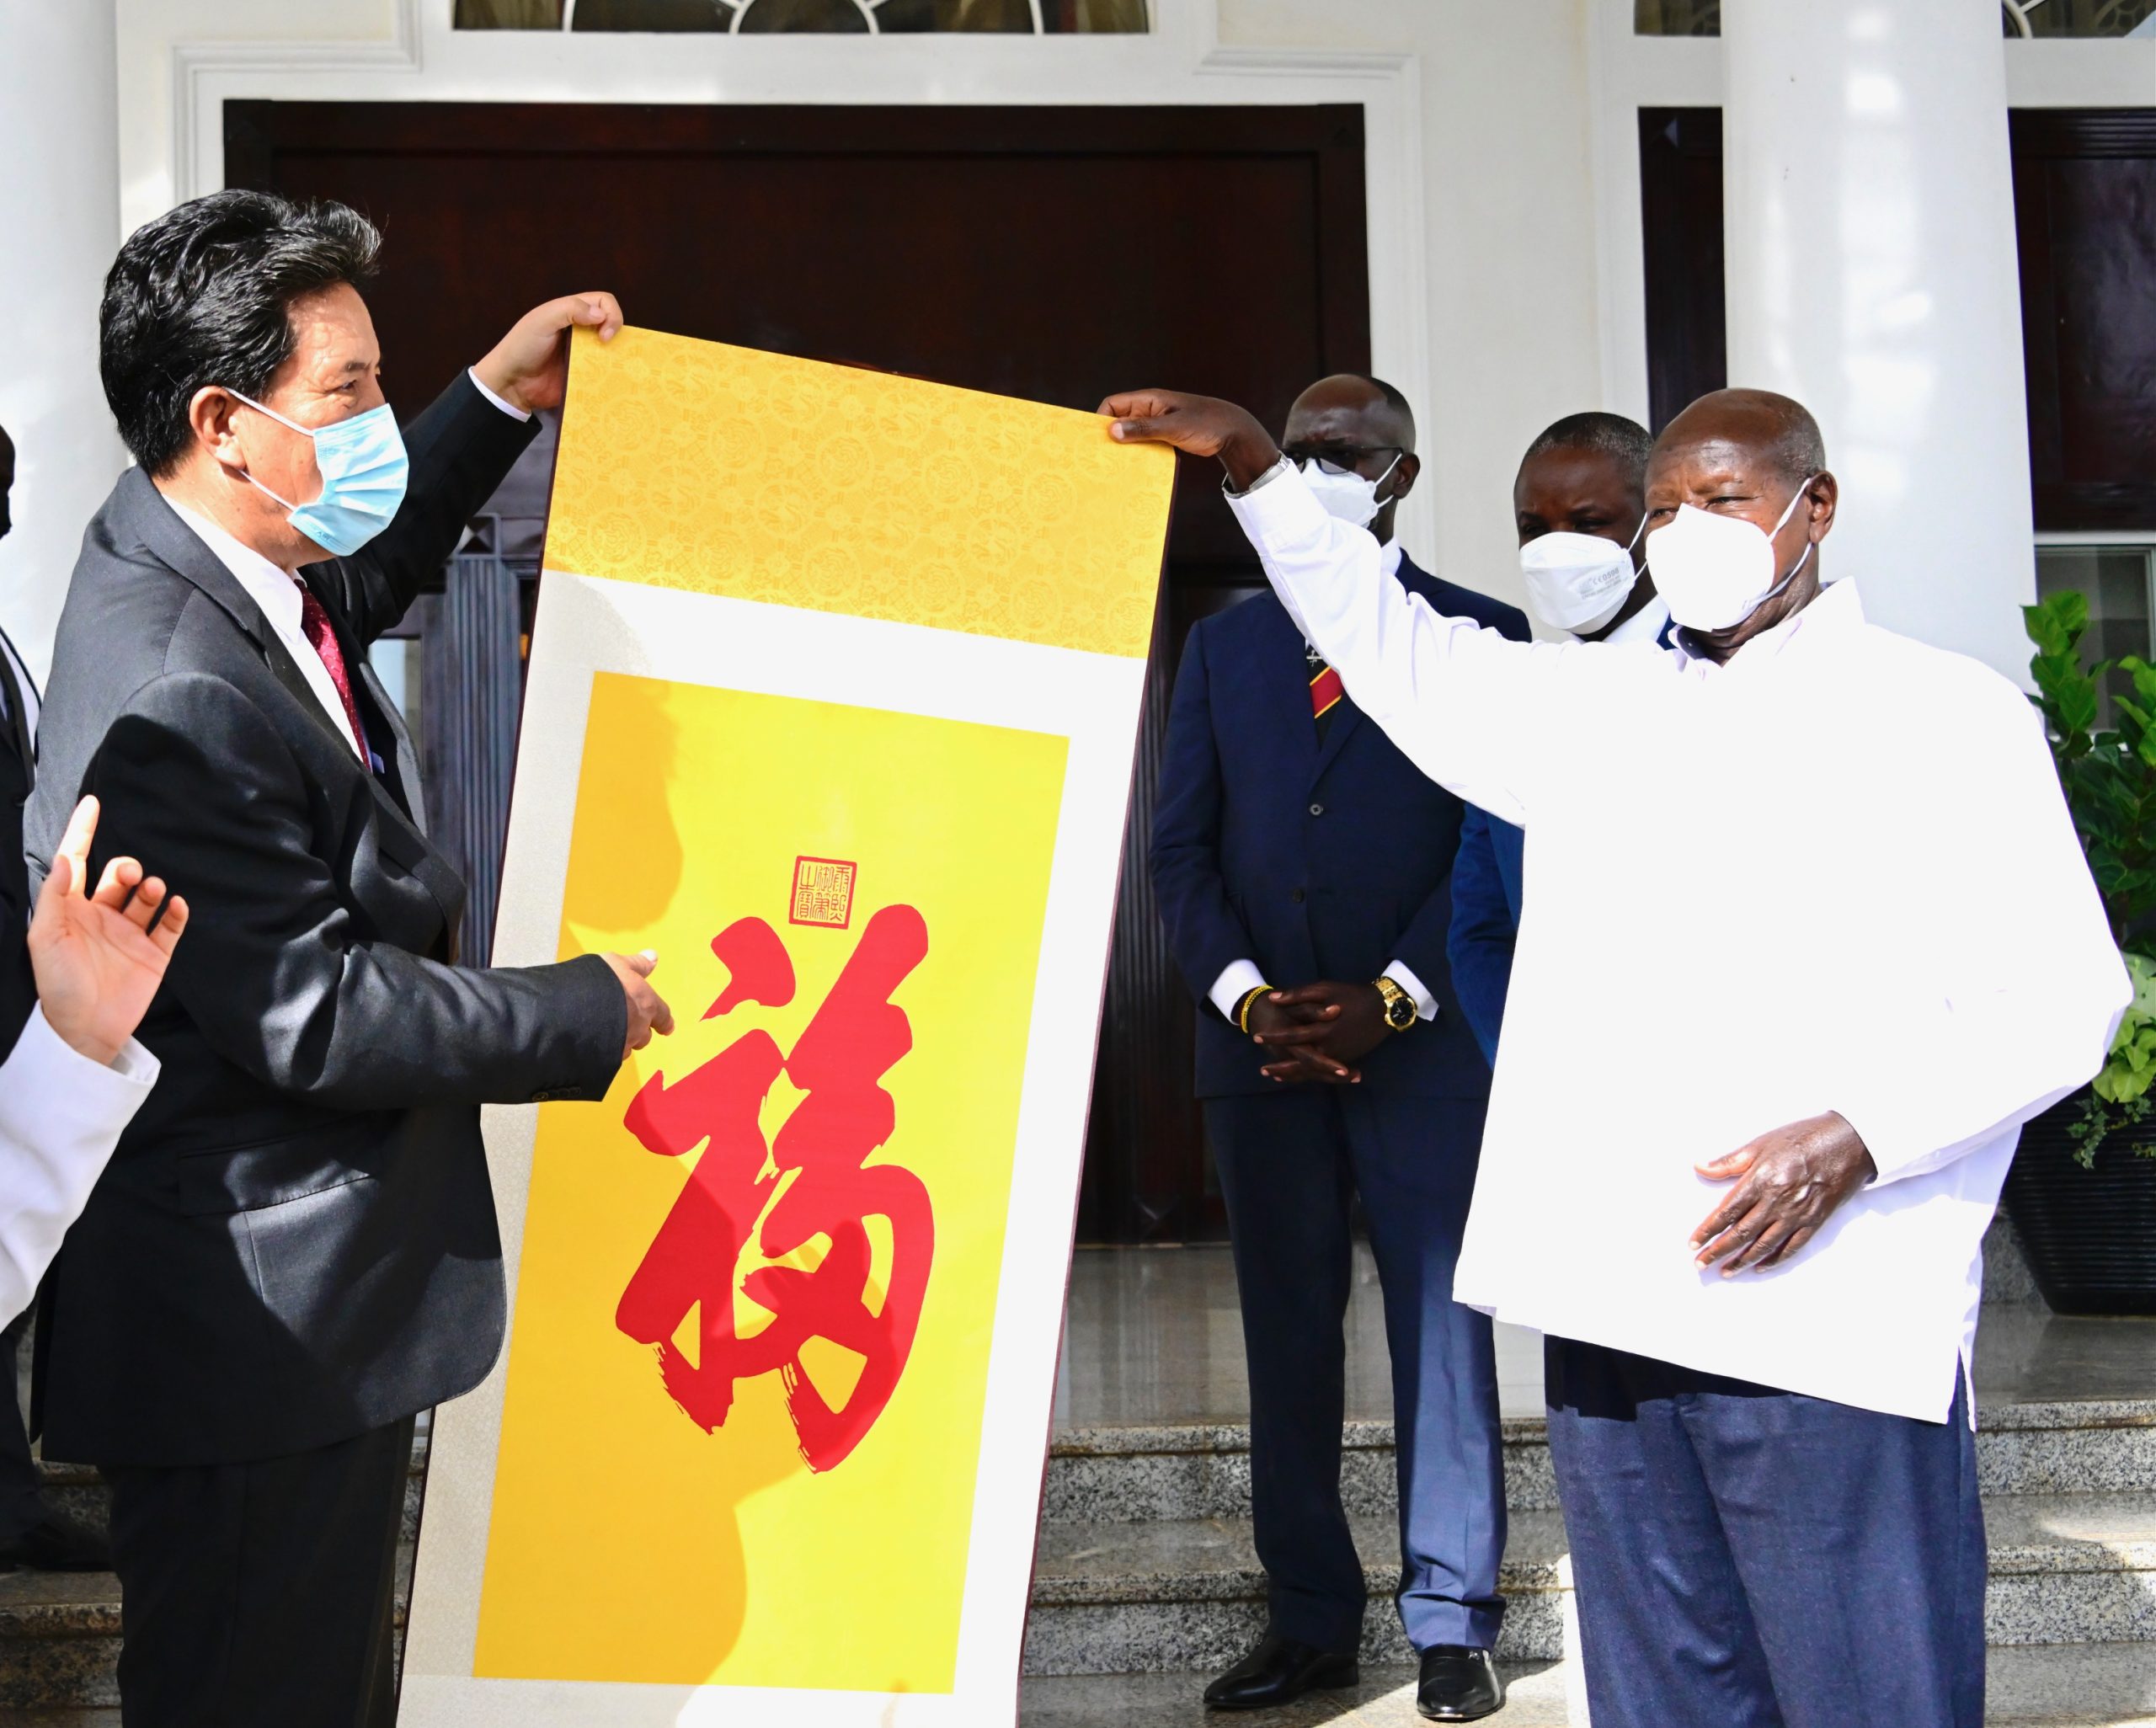 PRESIDENT MUSEVENI APPEALS TO CHINA TO OPEN THEIR MARKET MORE FOR FINISHED PRODUCTS